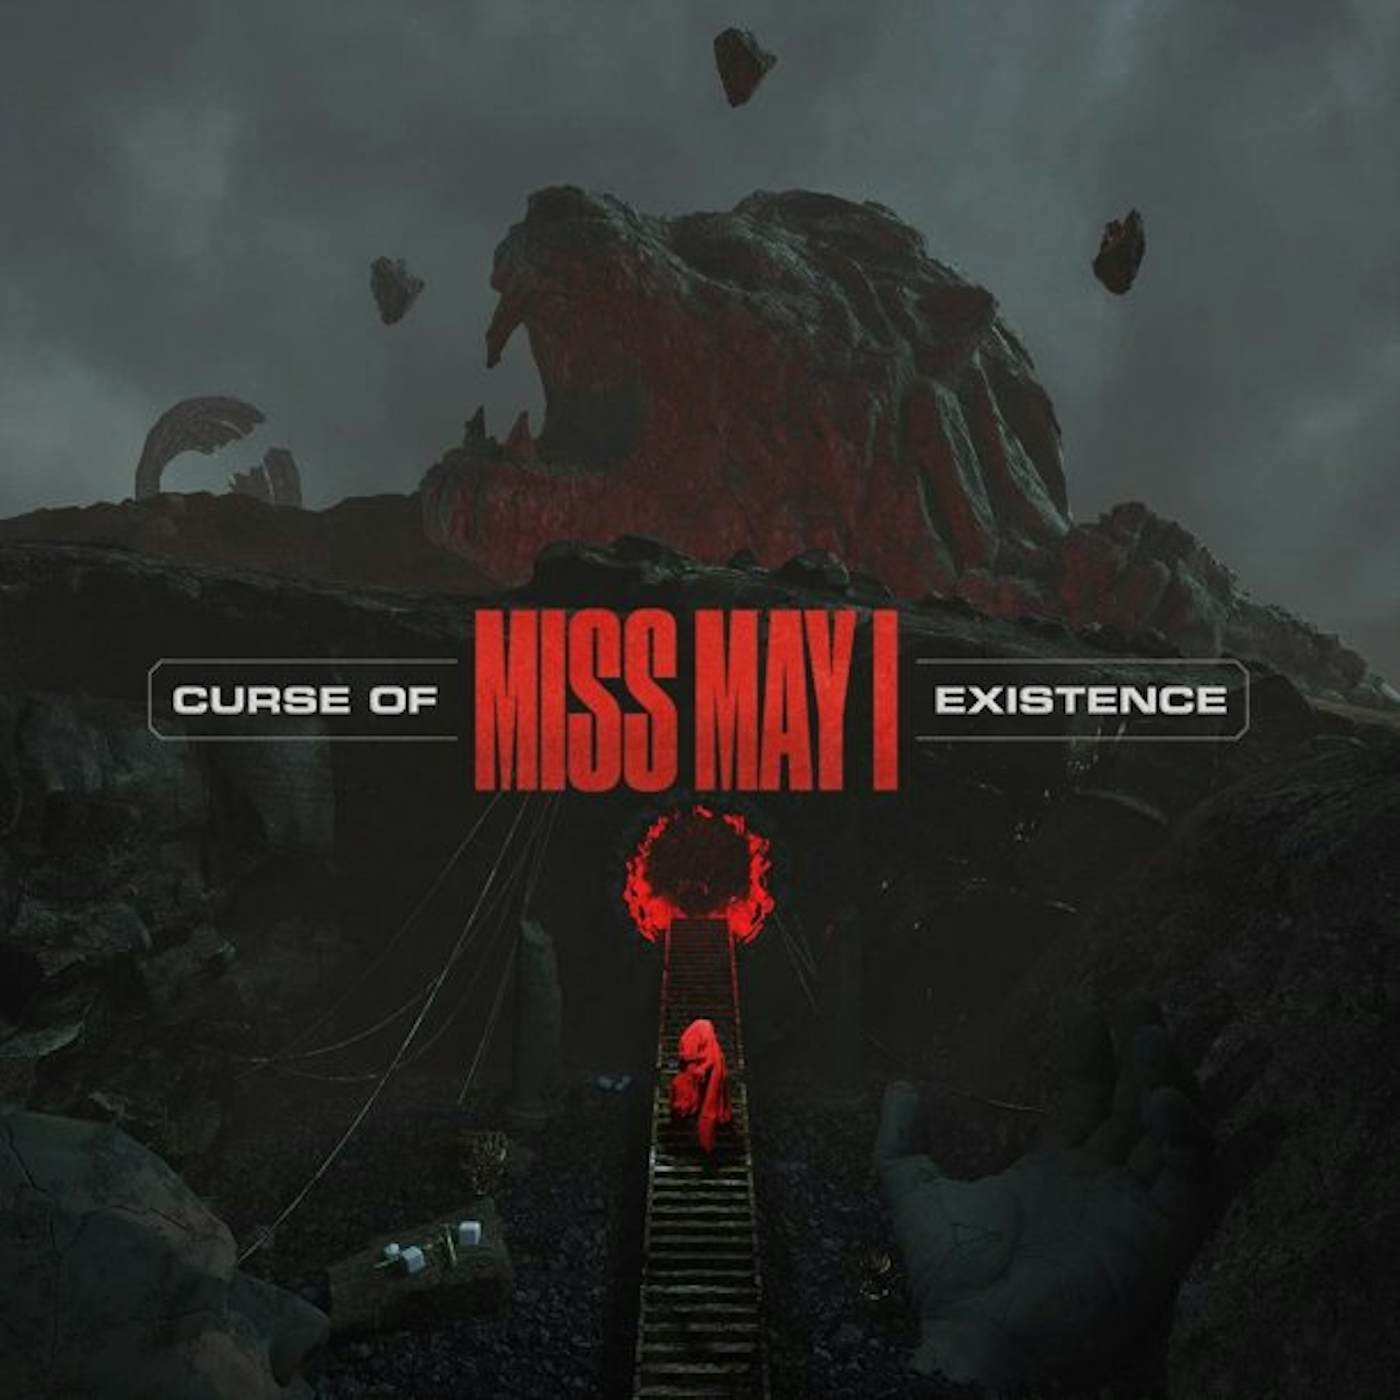 Miss May I Curse Of Existence (Glow In The Dark vinyl) vinyl record